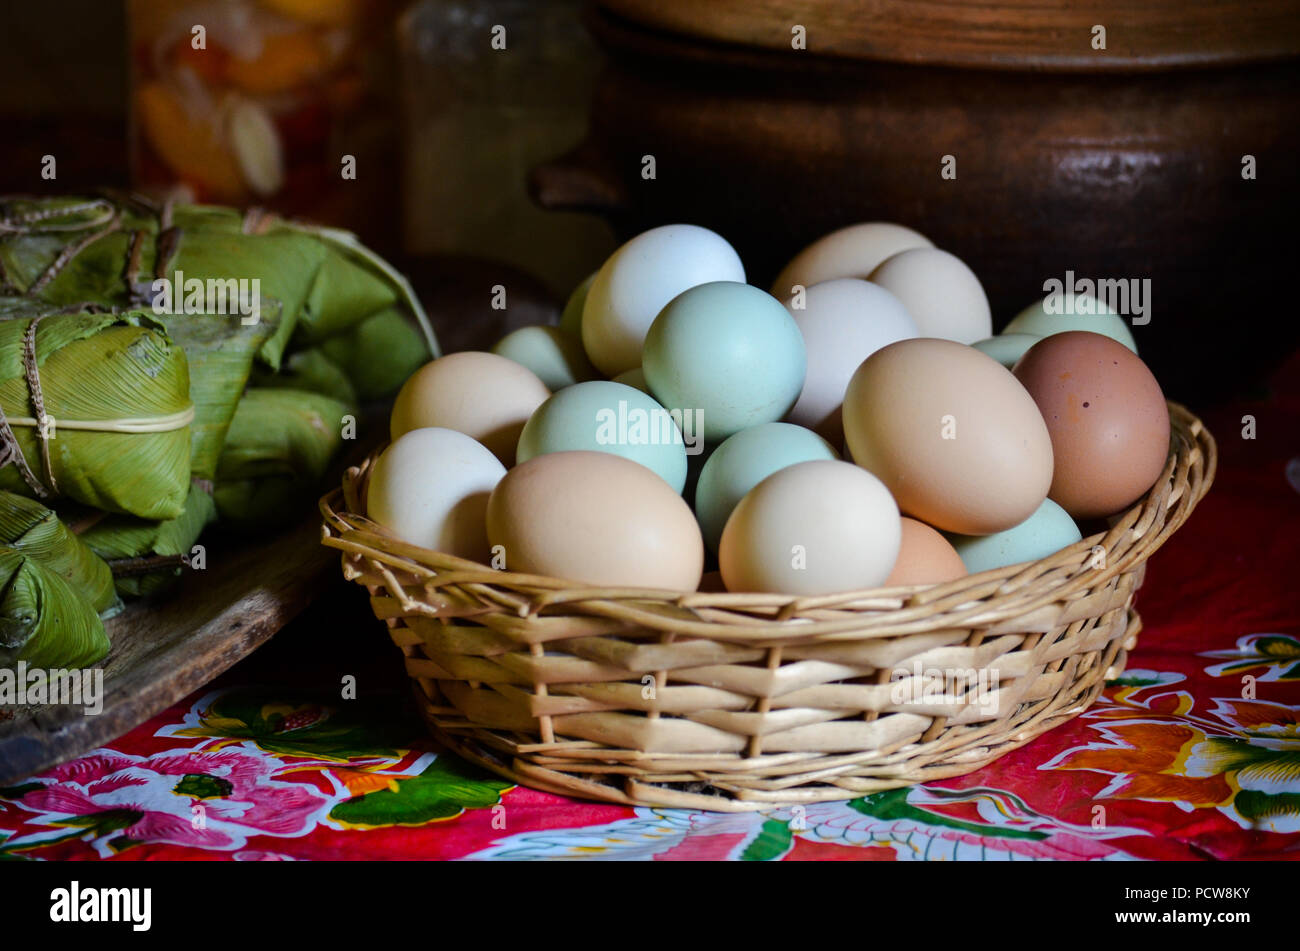 Eggs on a bowl Stock Photo